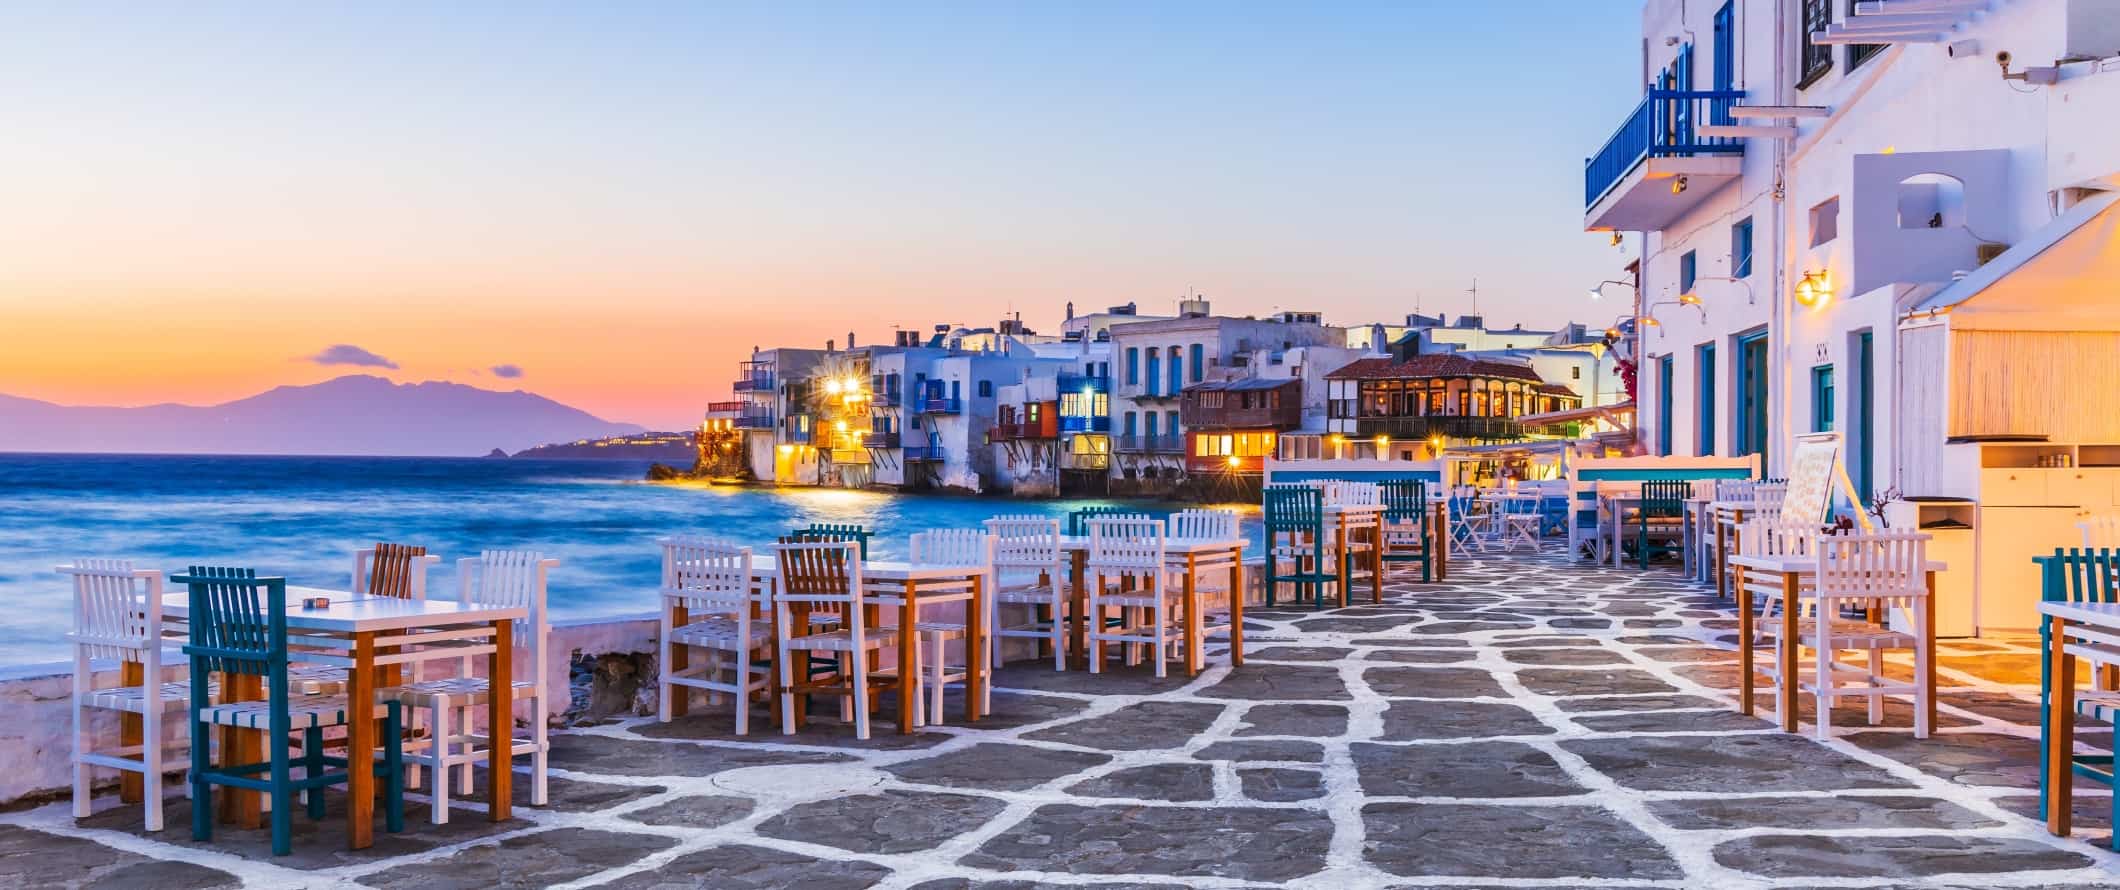 The harborfront and Old Venice neighborhood on the island of Mykonos in Greece.